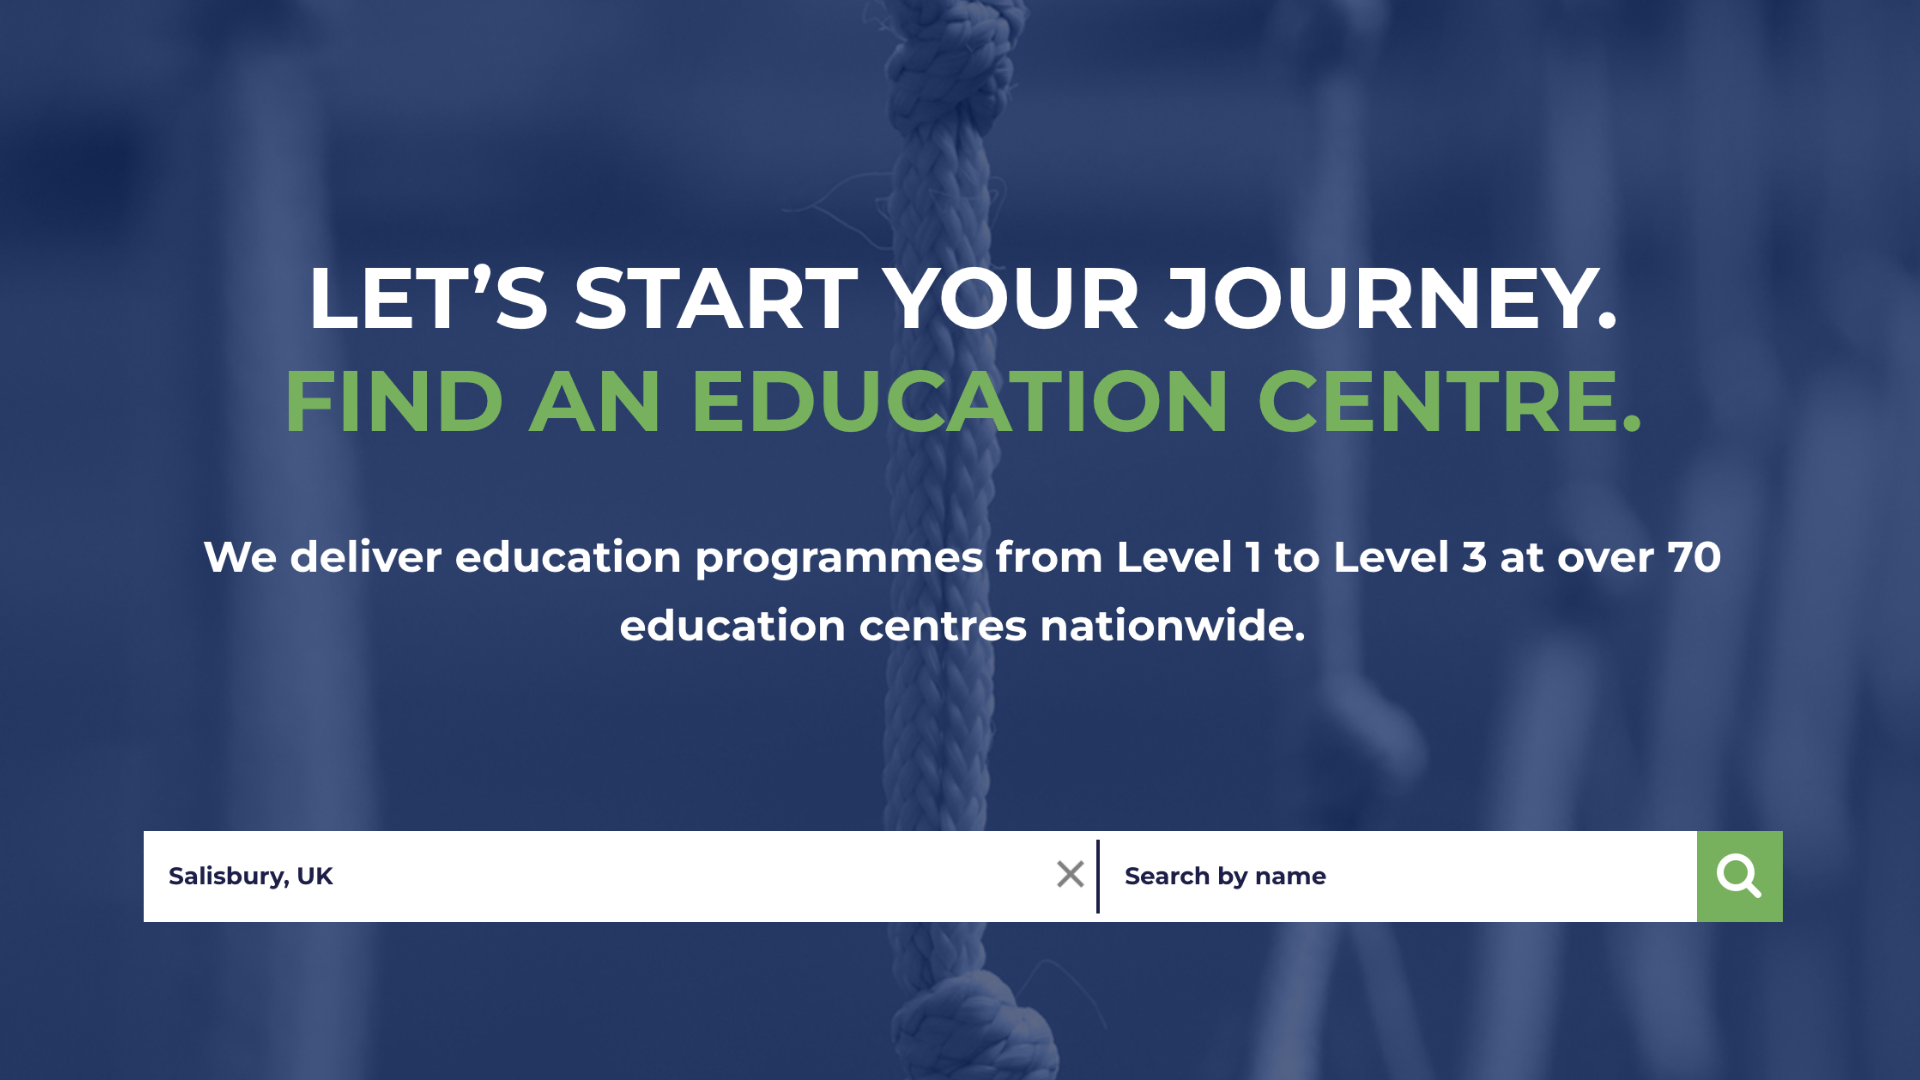 Blue background, white and green text reads: Let's start your journey. Find an education centre.